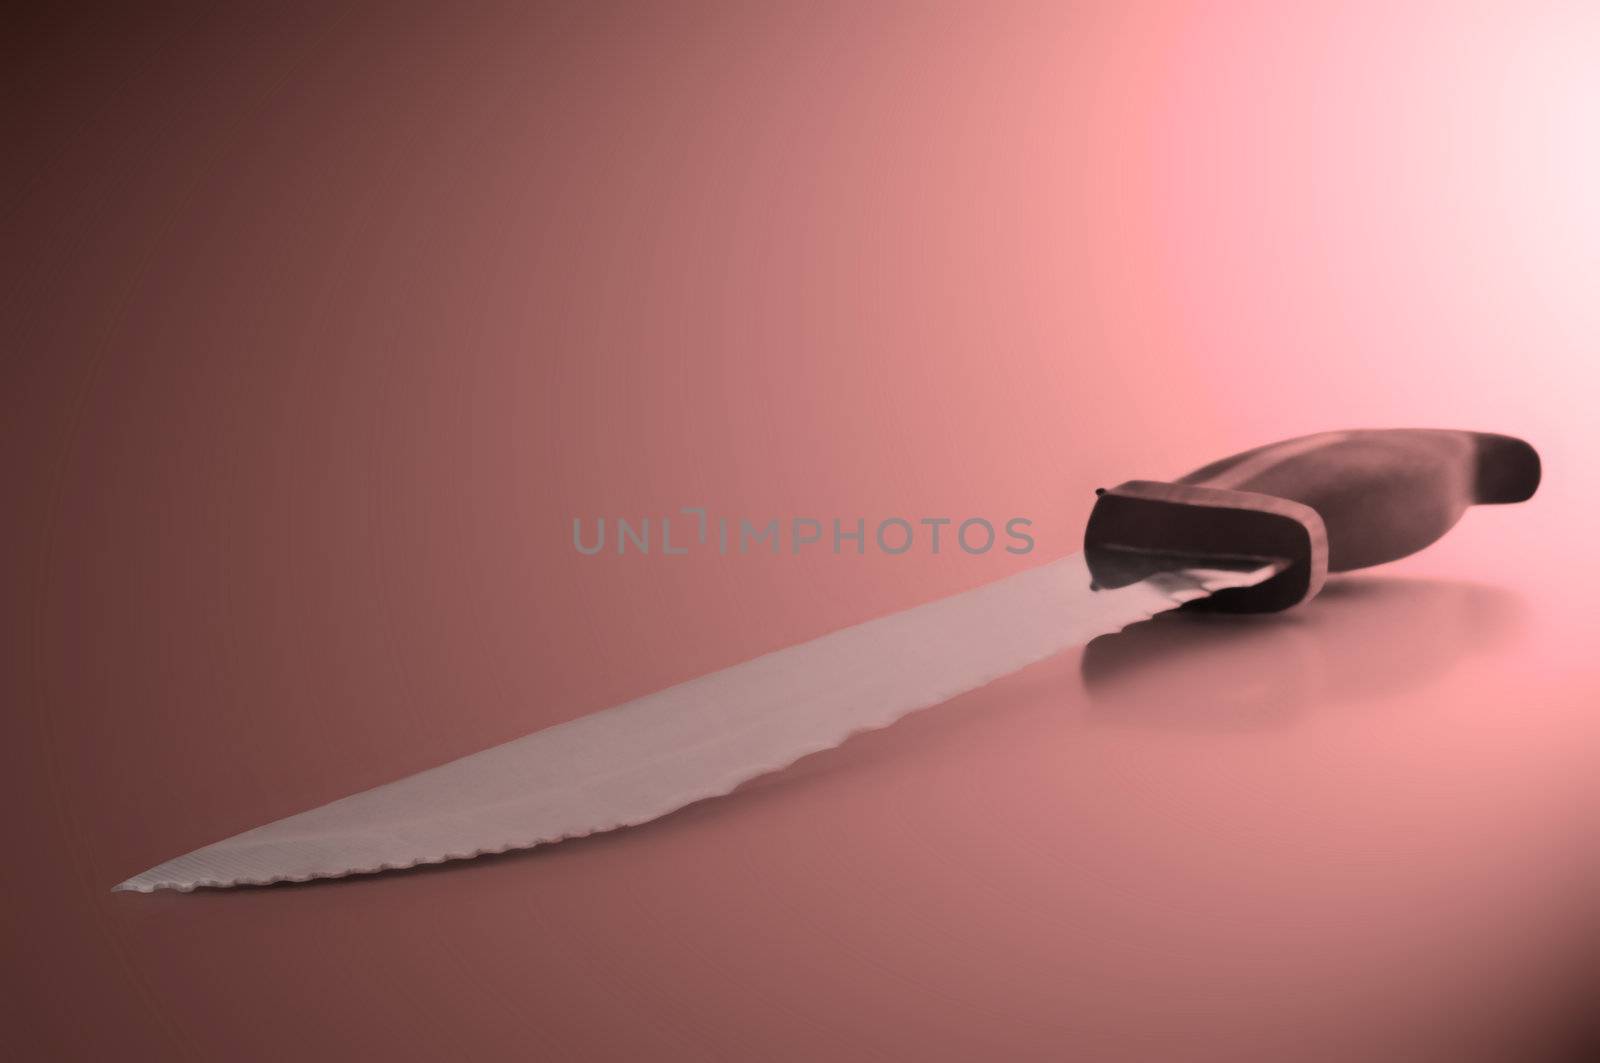 Close and low level angle capturing a stainless steel kitchen knife arranged over pink light effect filter